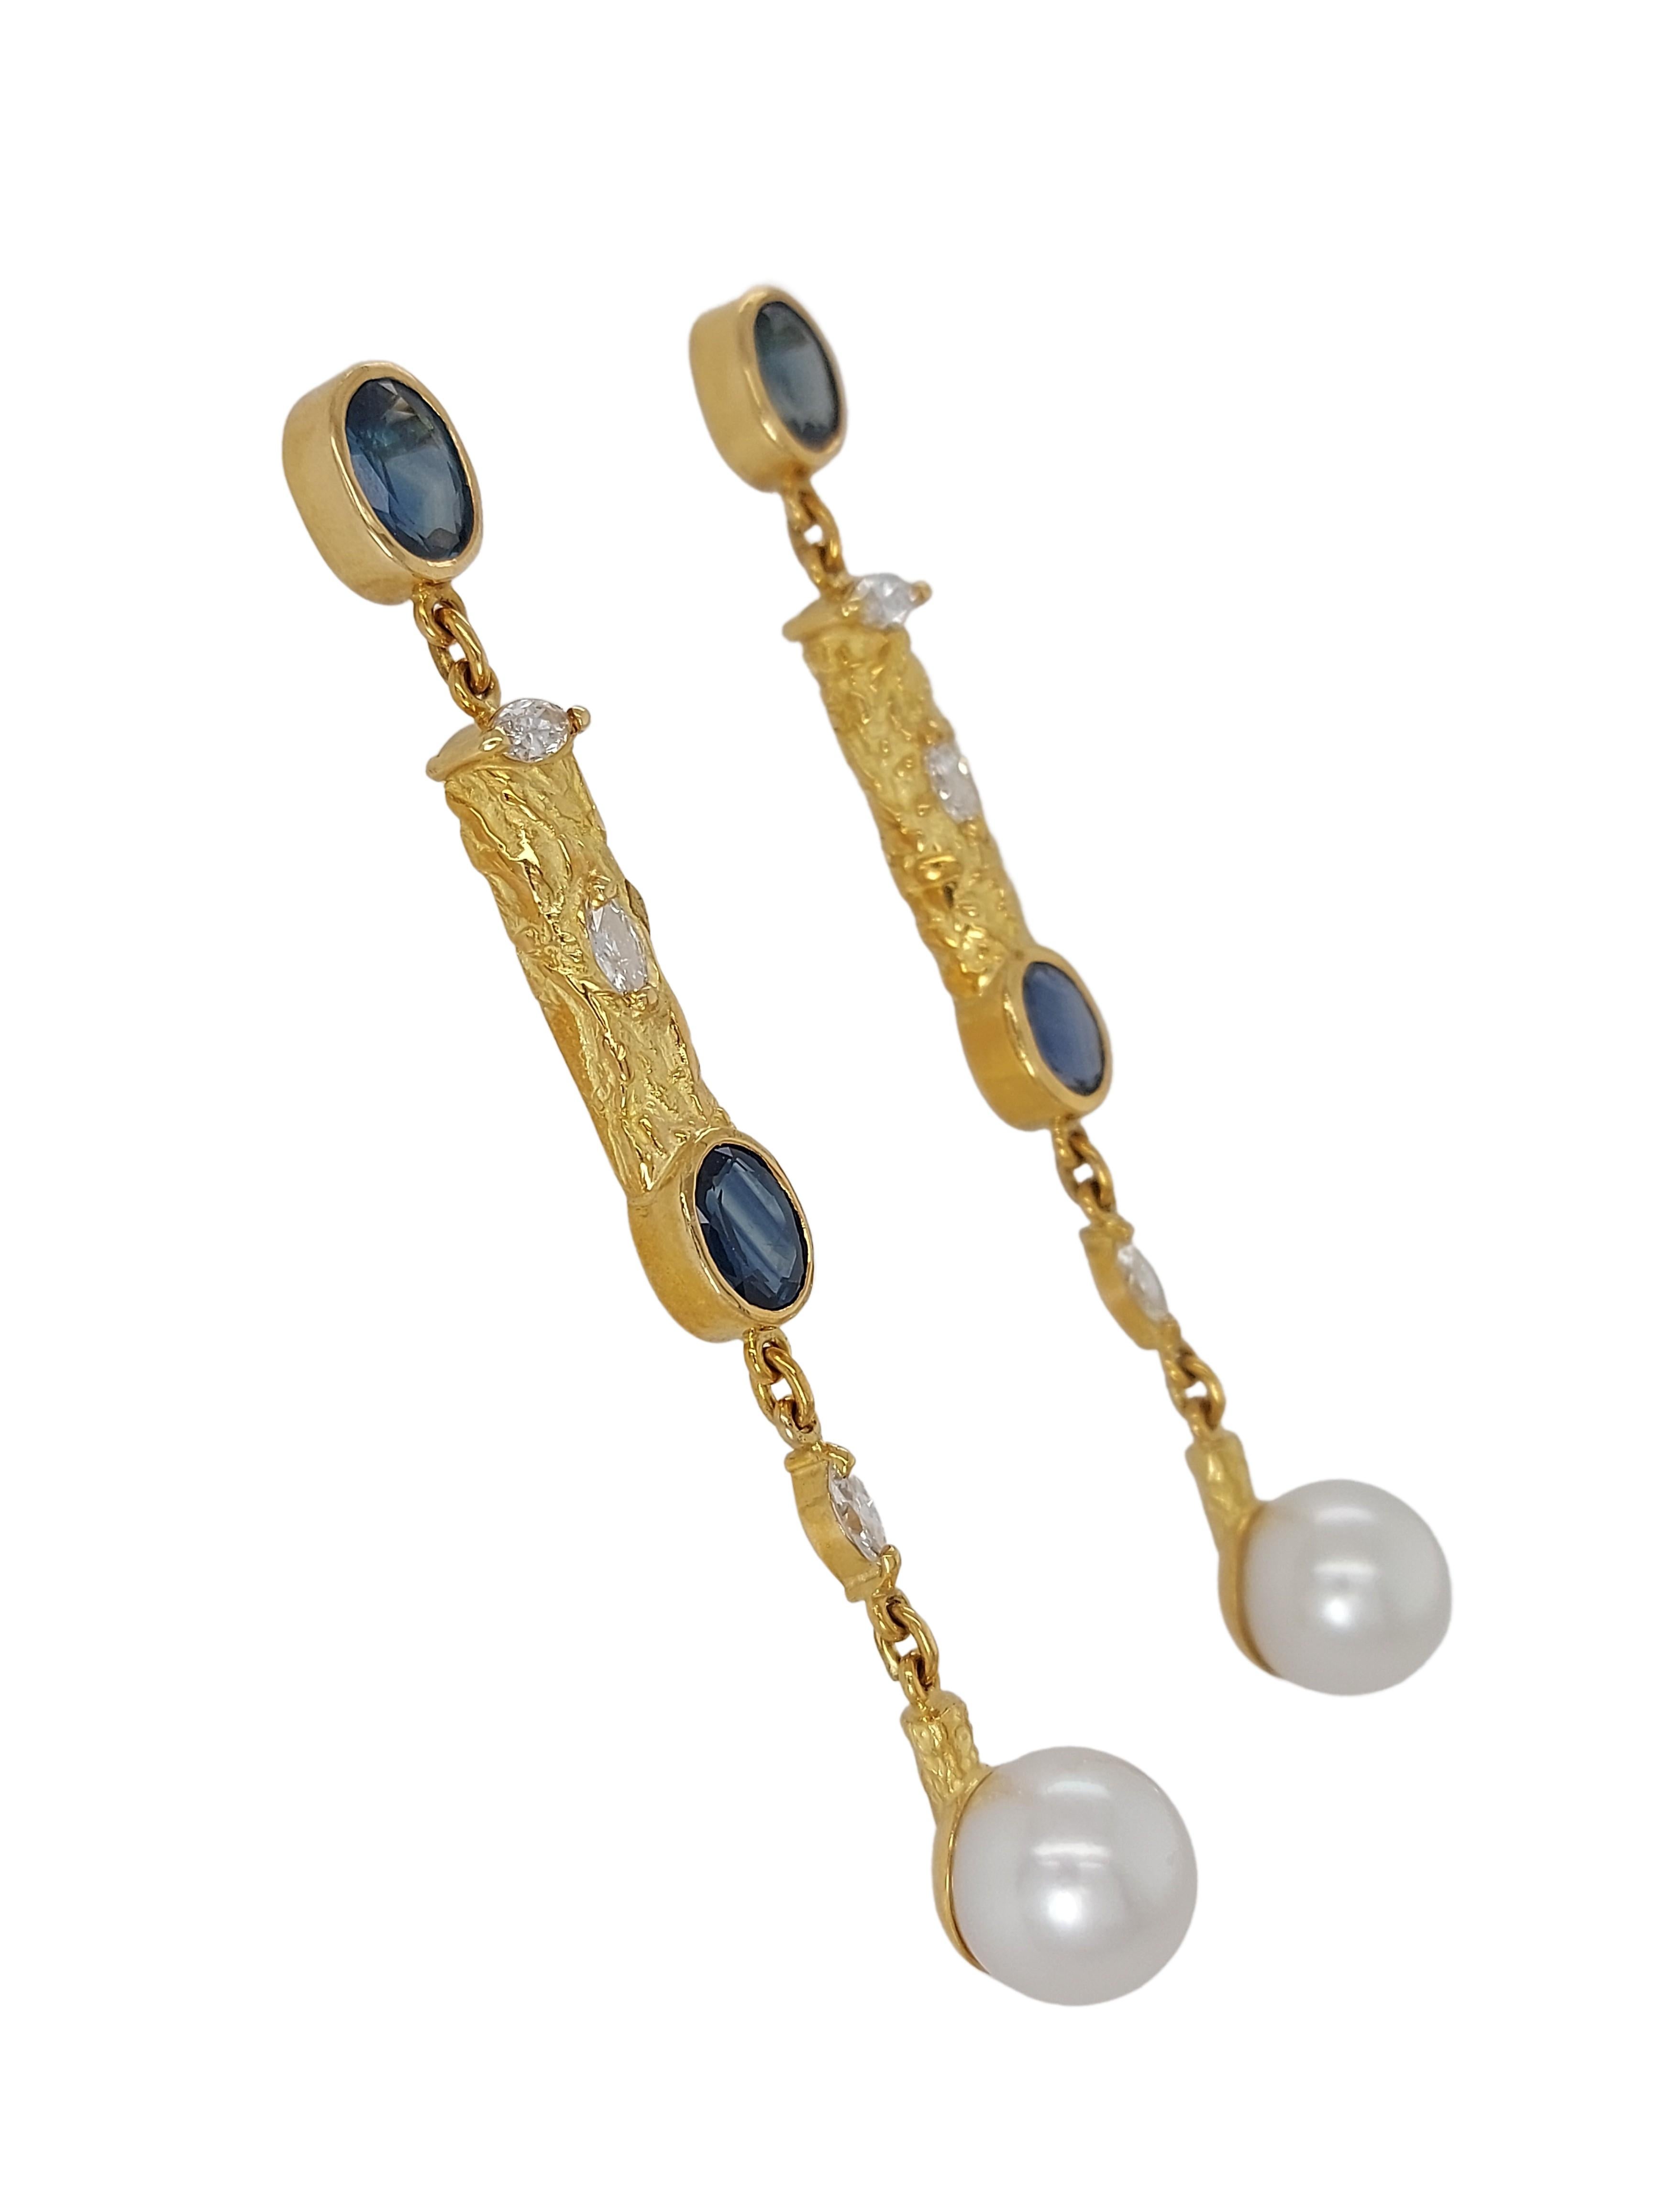 Oval Cut J.P De Saedeleer 18 Kt gold Earrings with 5.84 Ct Sapphires, Diamonds, Pearl For Sale